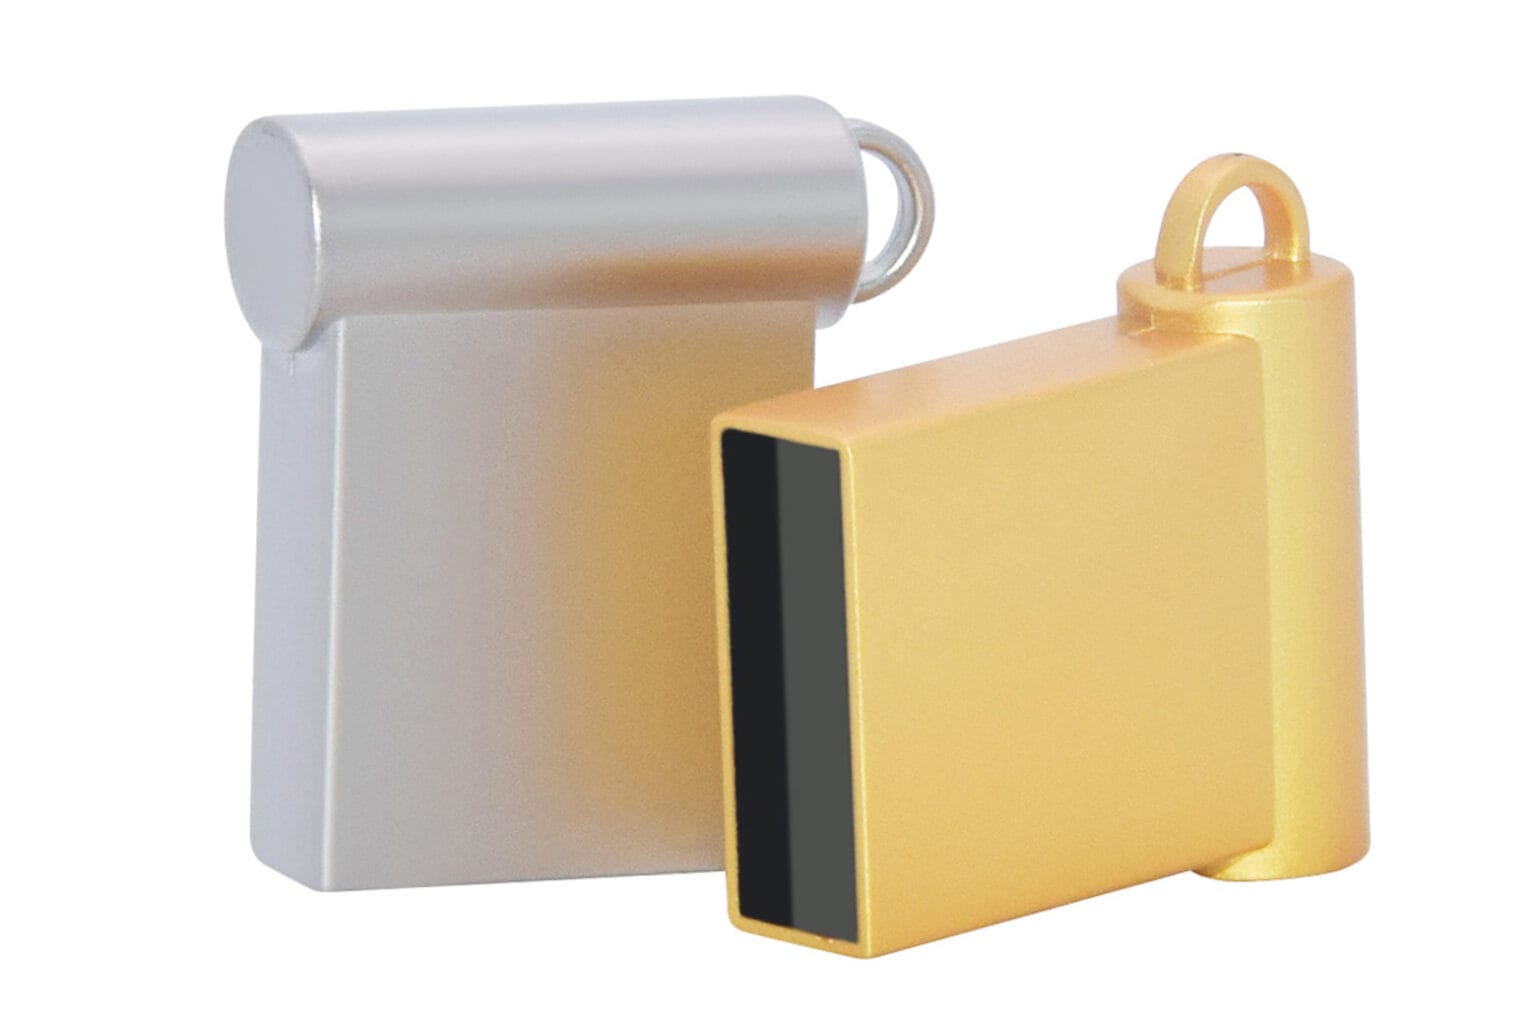 This flash drive packs 64GB of storage while weighing less than six grams.